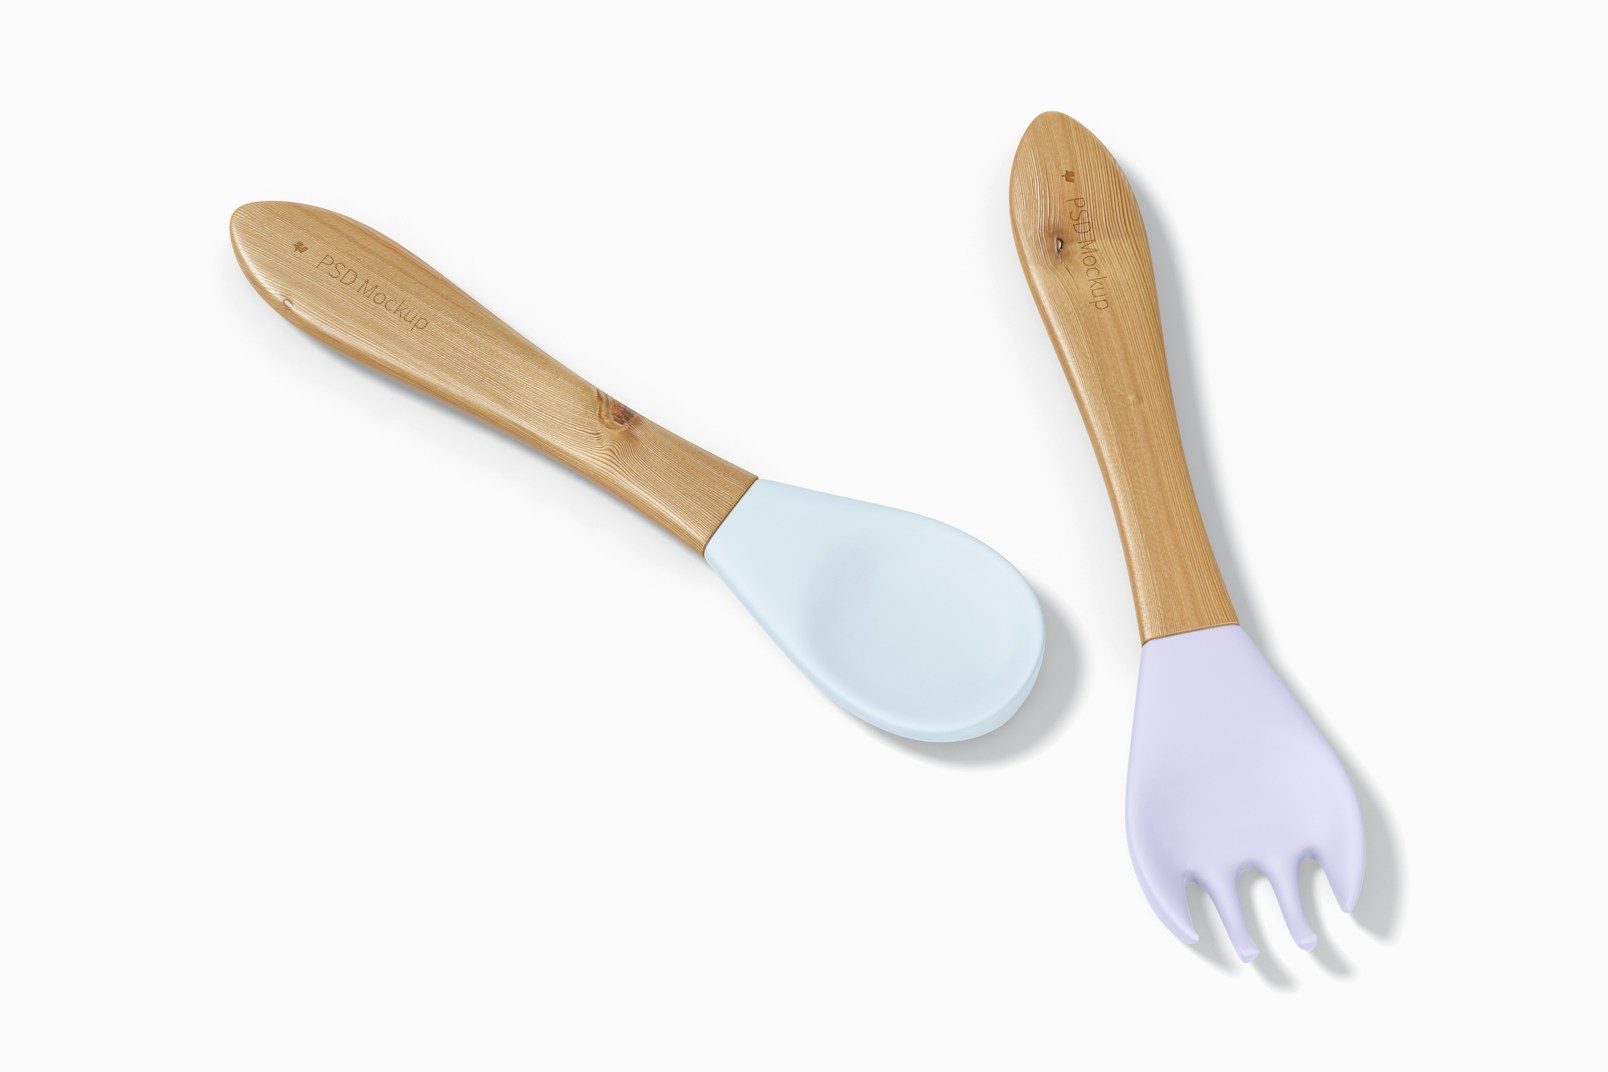 Wooden Spoon and Fork Mockup, Perspective